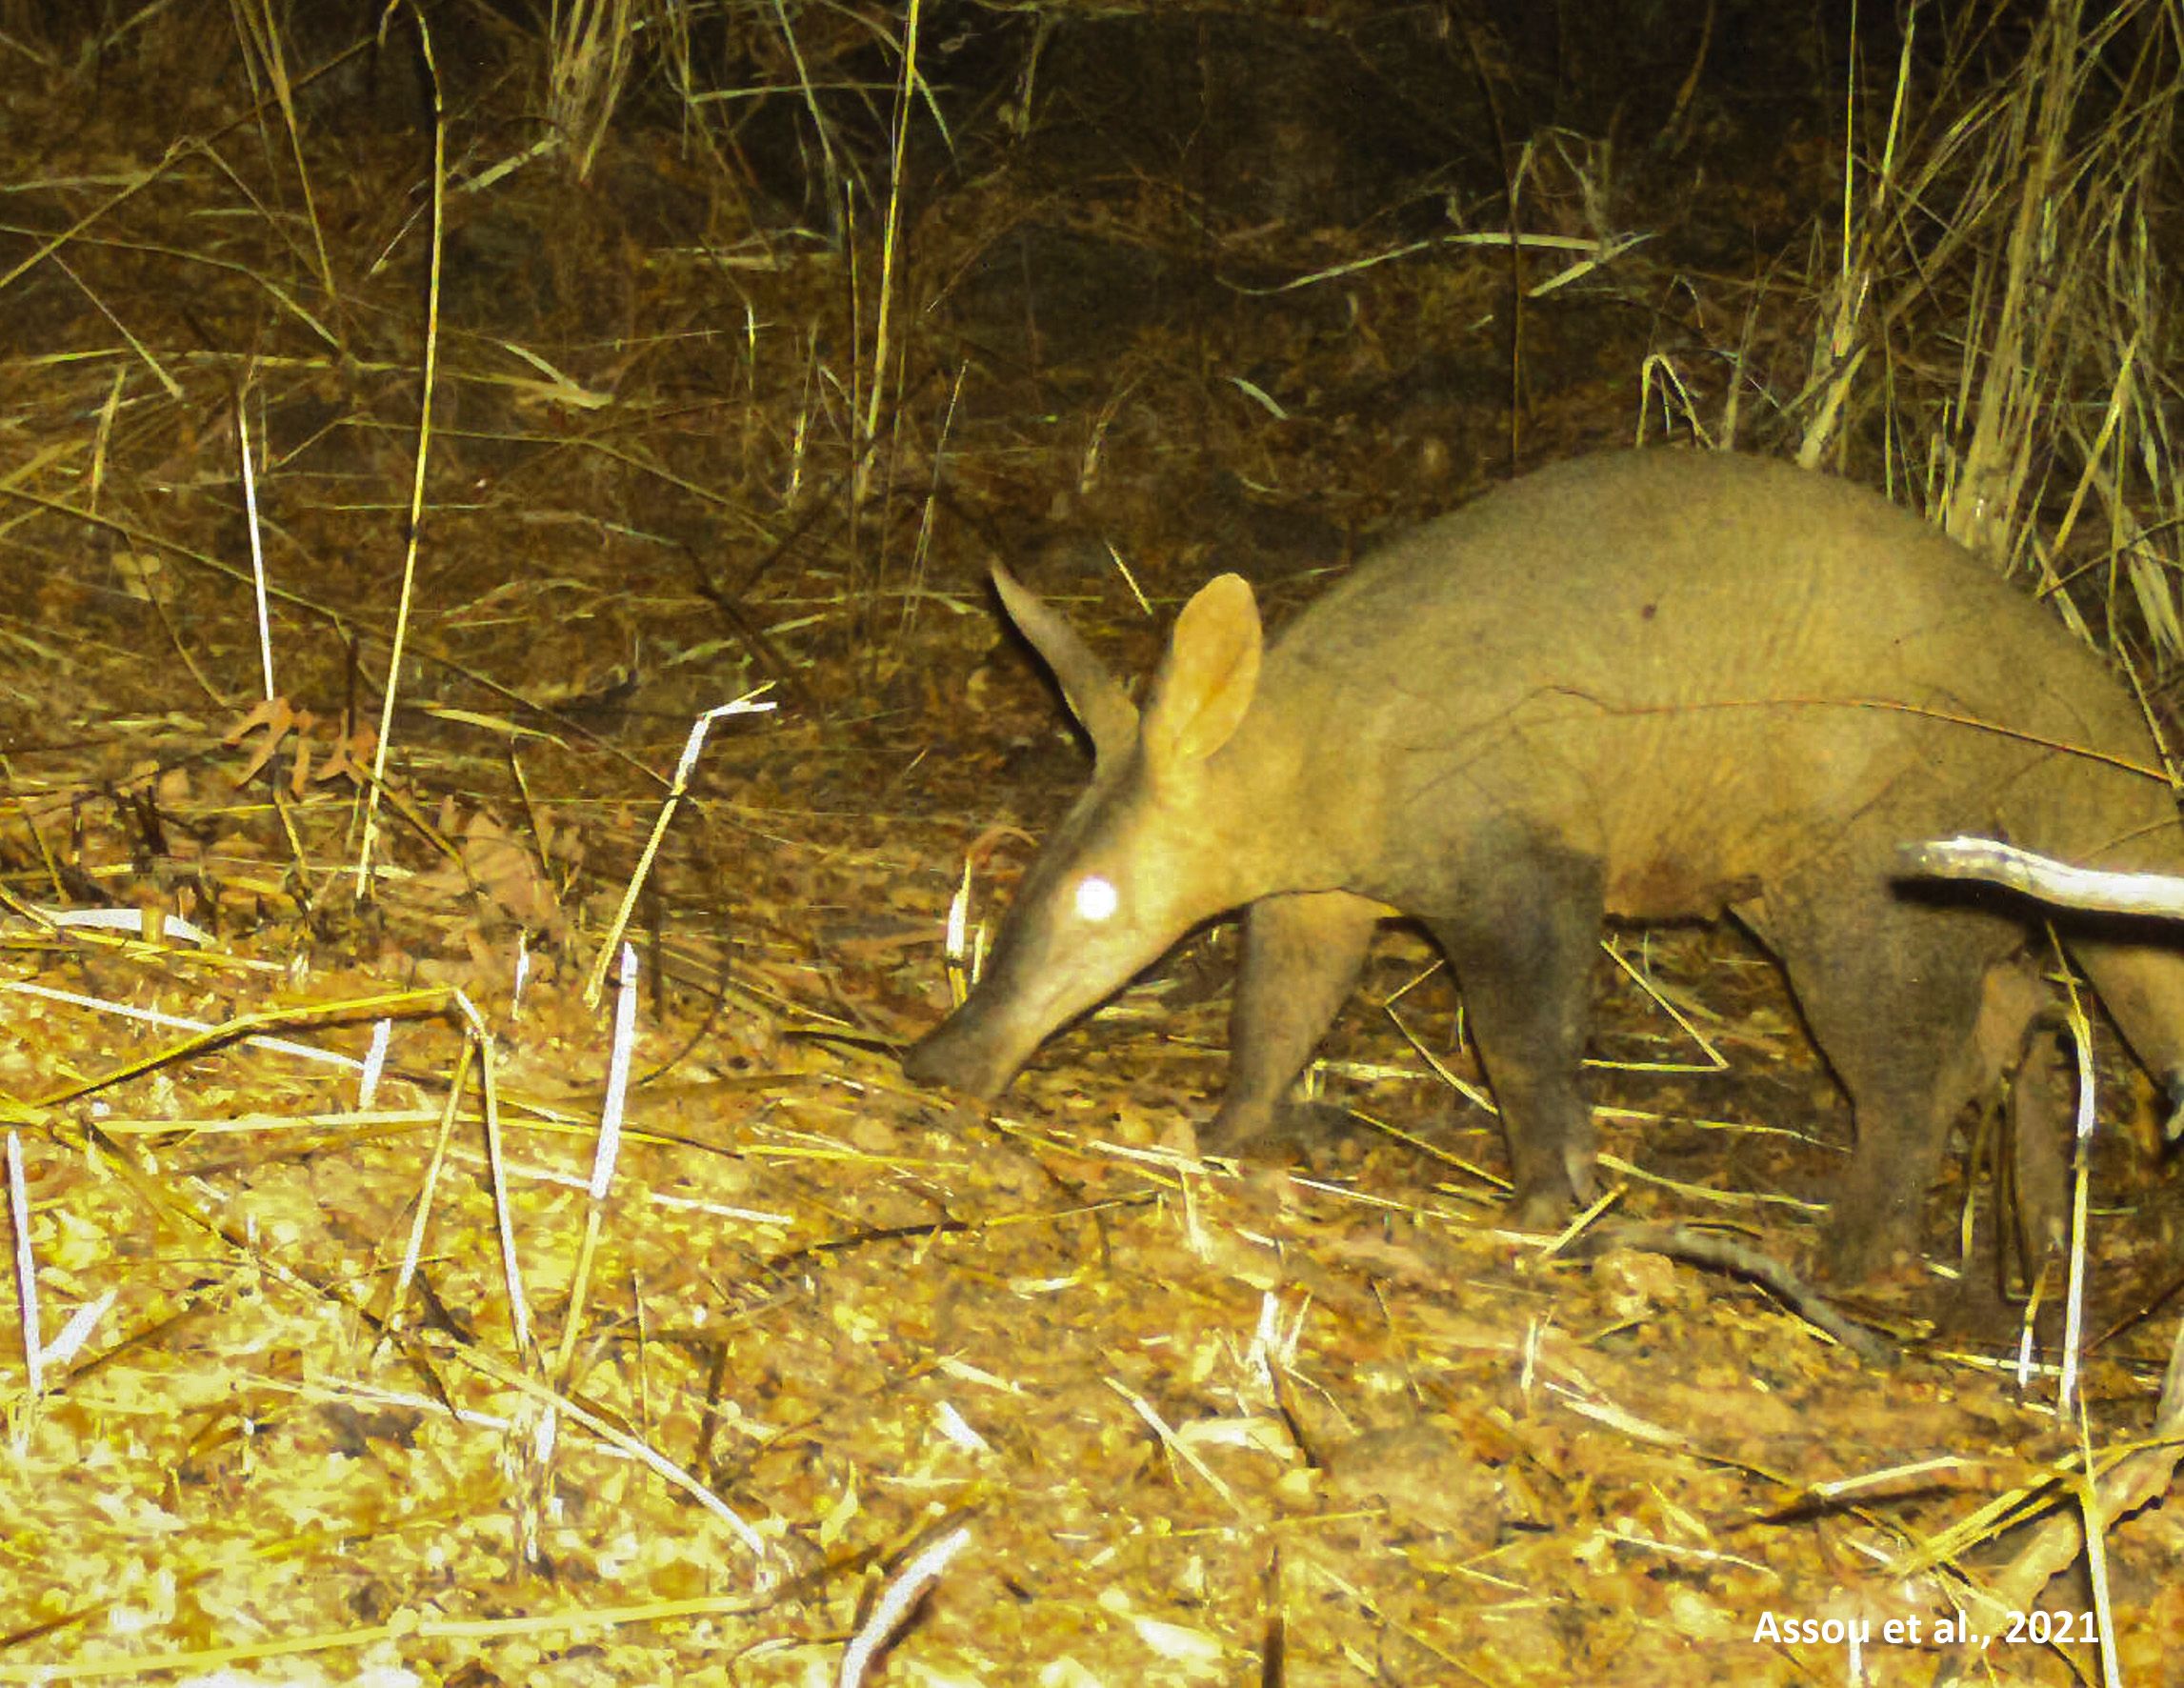 The team also found an aardvark, the first spotted in the country. (Image: Assou et al. 2021)